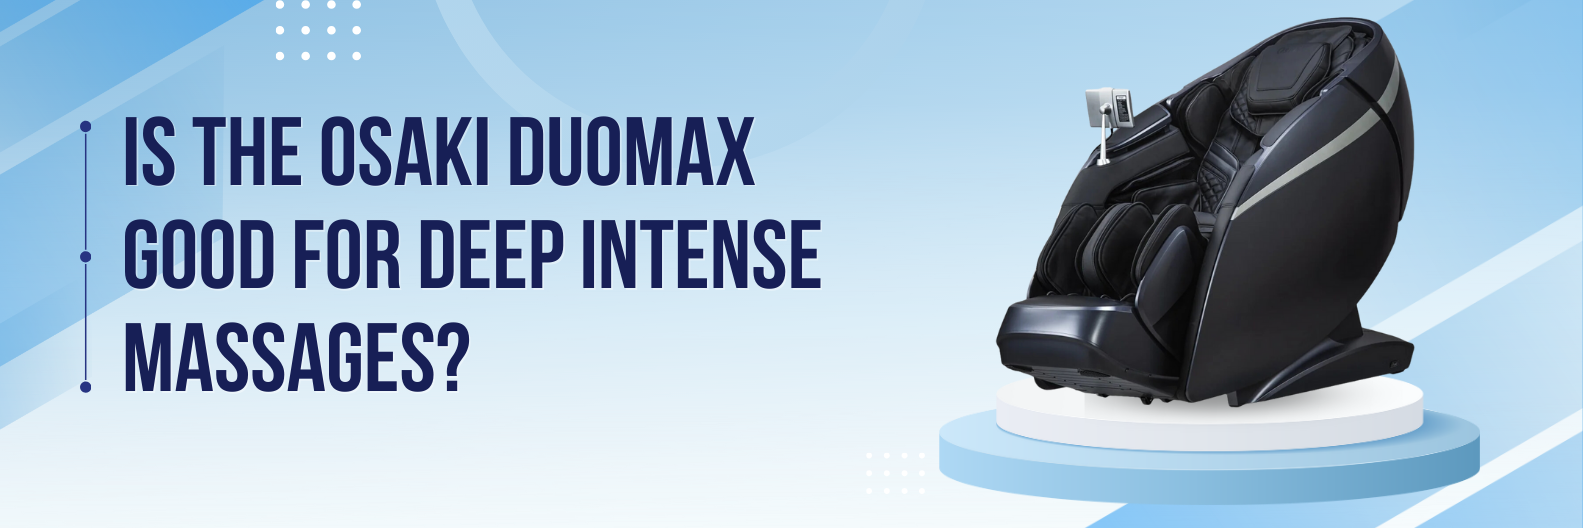 The Osaki OS-Pro 4D DuoMax Massage Chair, with its advanced 4D technology and customizable settings, offers a comprehensive and deeply satisfying massage experience, making it an excellent choice for those seeking deep, intense massages.